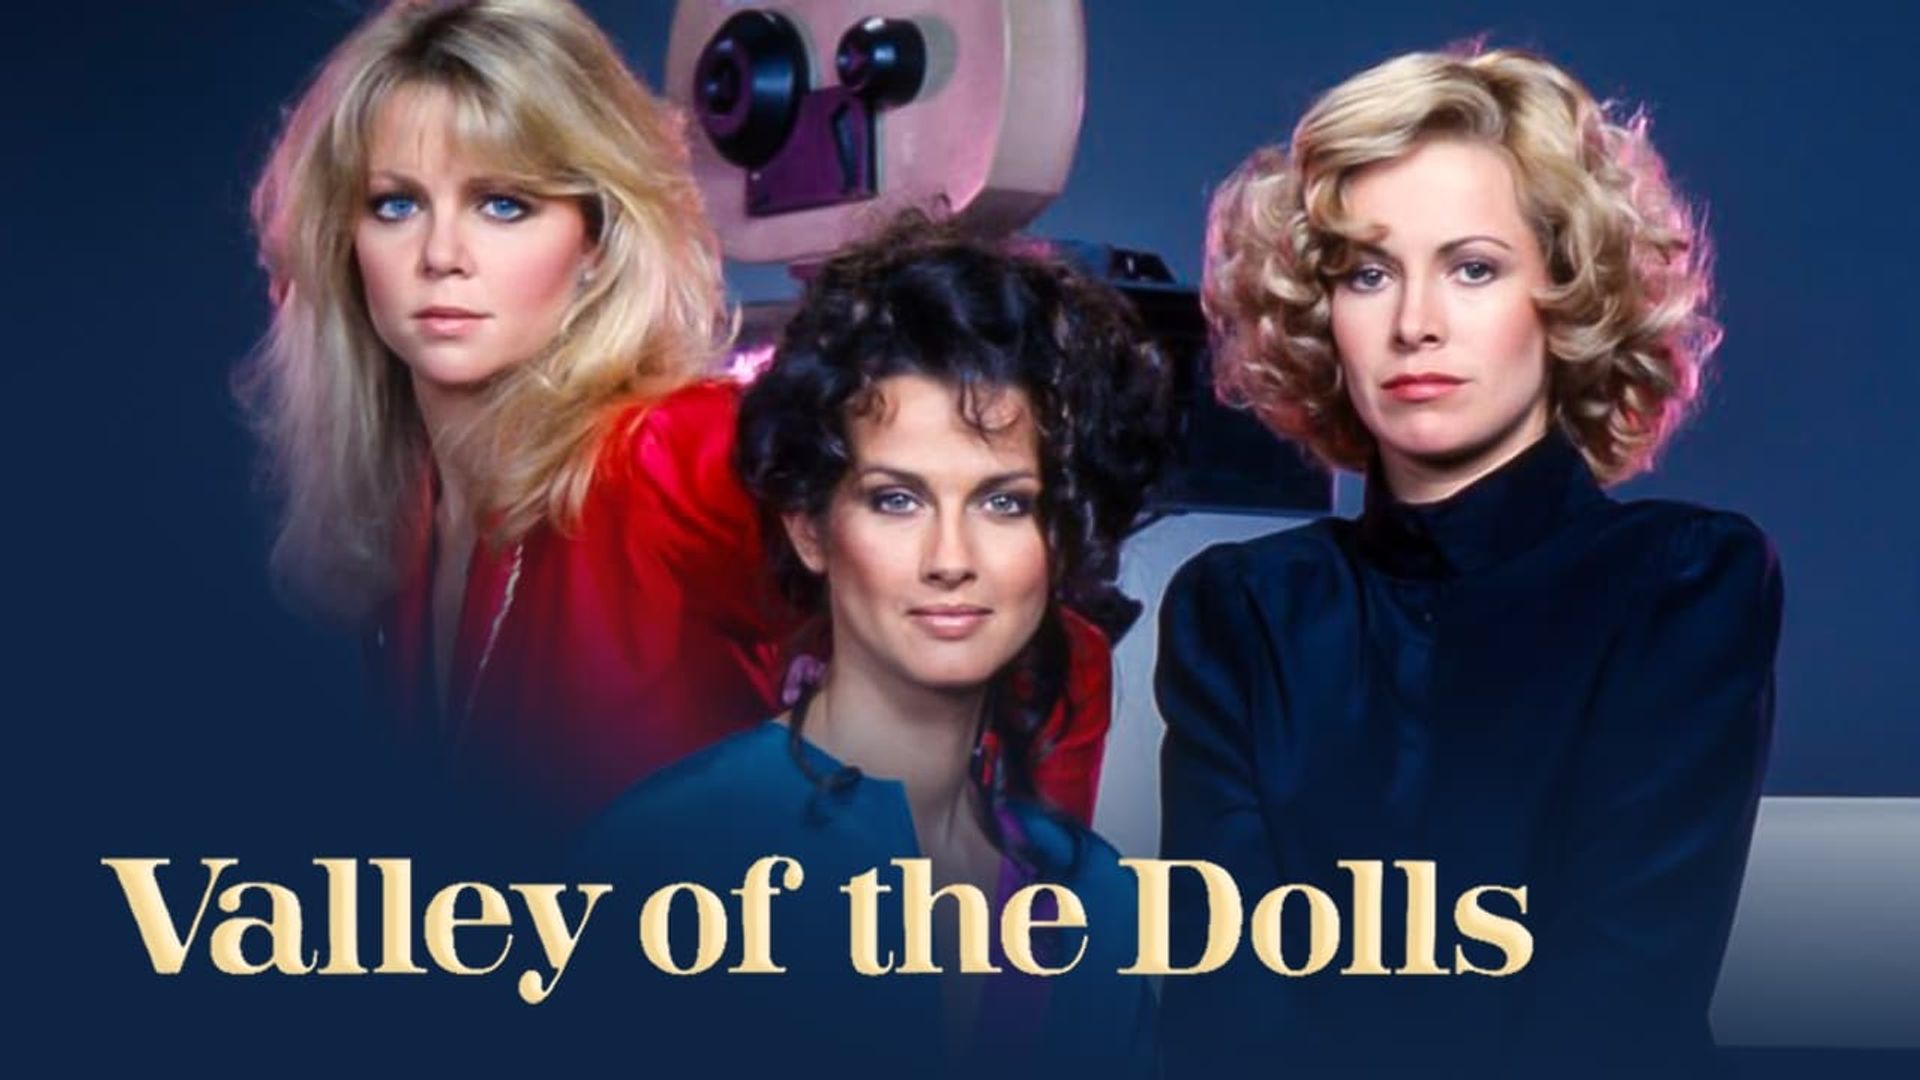 Jacqueline Susann's Valley of the Dolls background